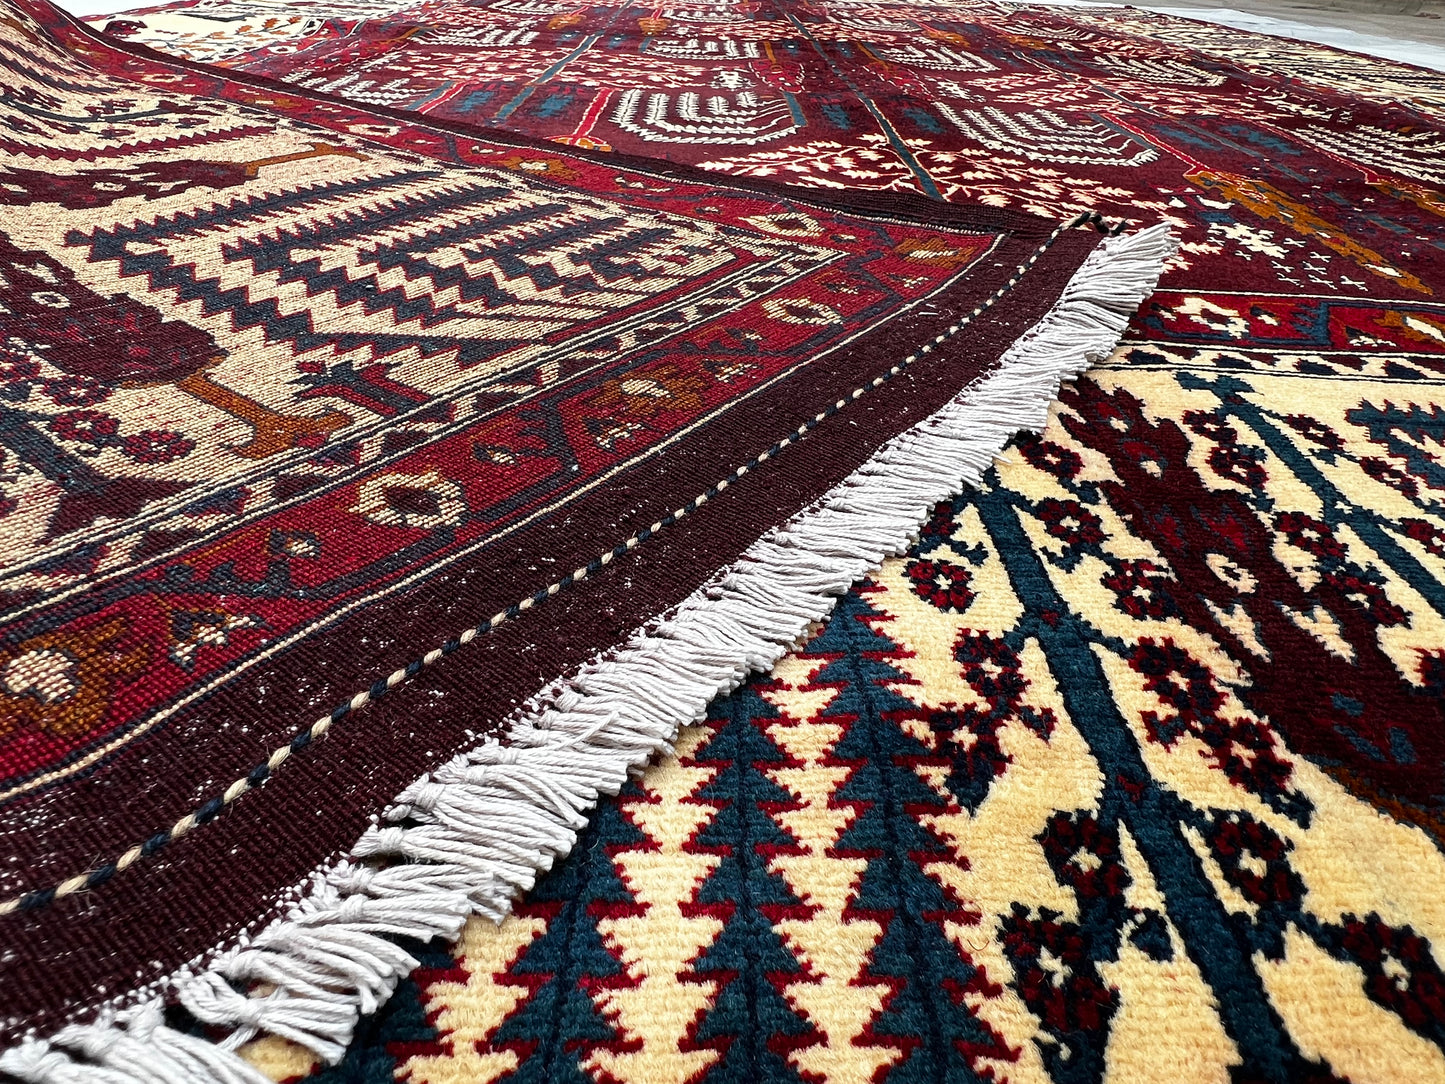 Afghan Hand Knitted/Knotted Area Rug Size 9.6ft x 6.4ft (BL-AND-9.6X6.4-R/YO-N) Belgic (Belgique)( Andkhoi) - Kabul Rugs